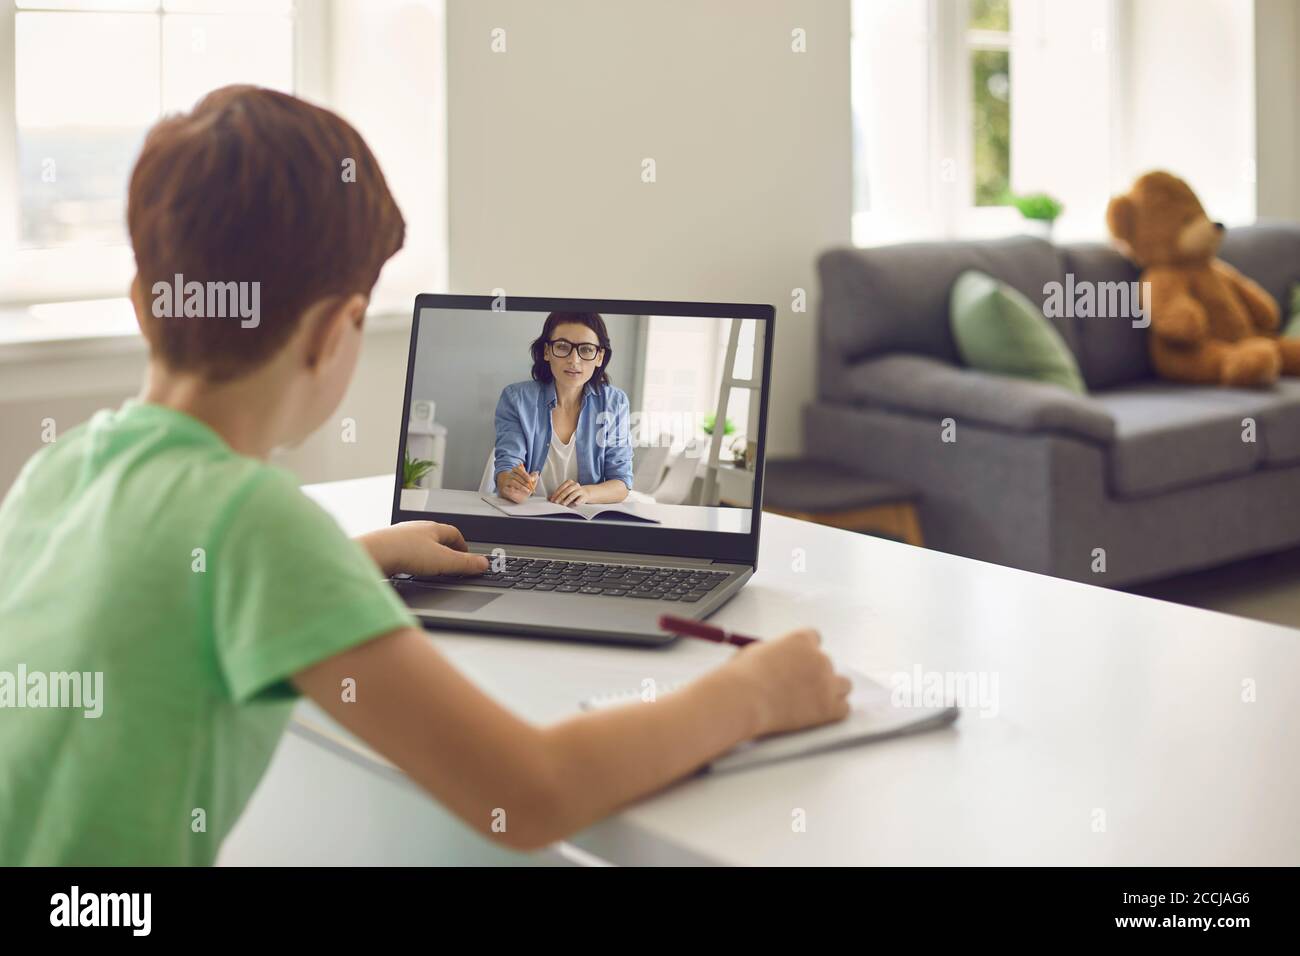 Online learning. Remote education. Home schooling. Social distance during quarantine, self-isolation. Stock Photo